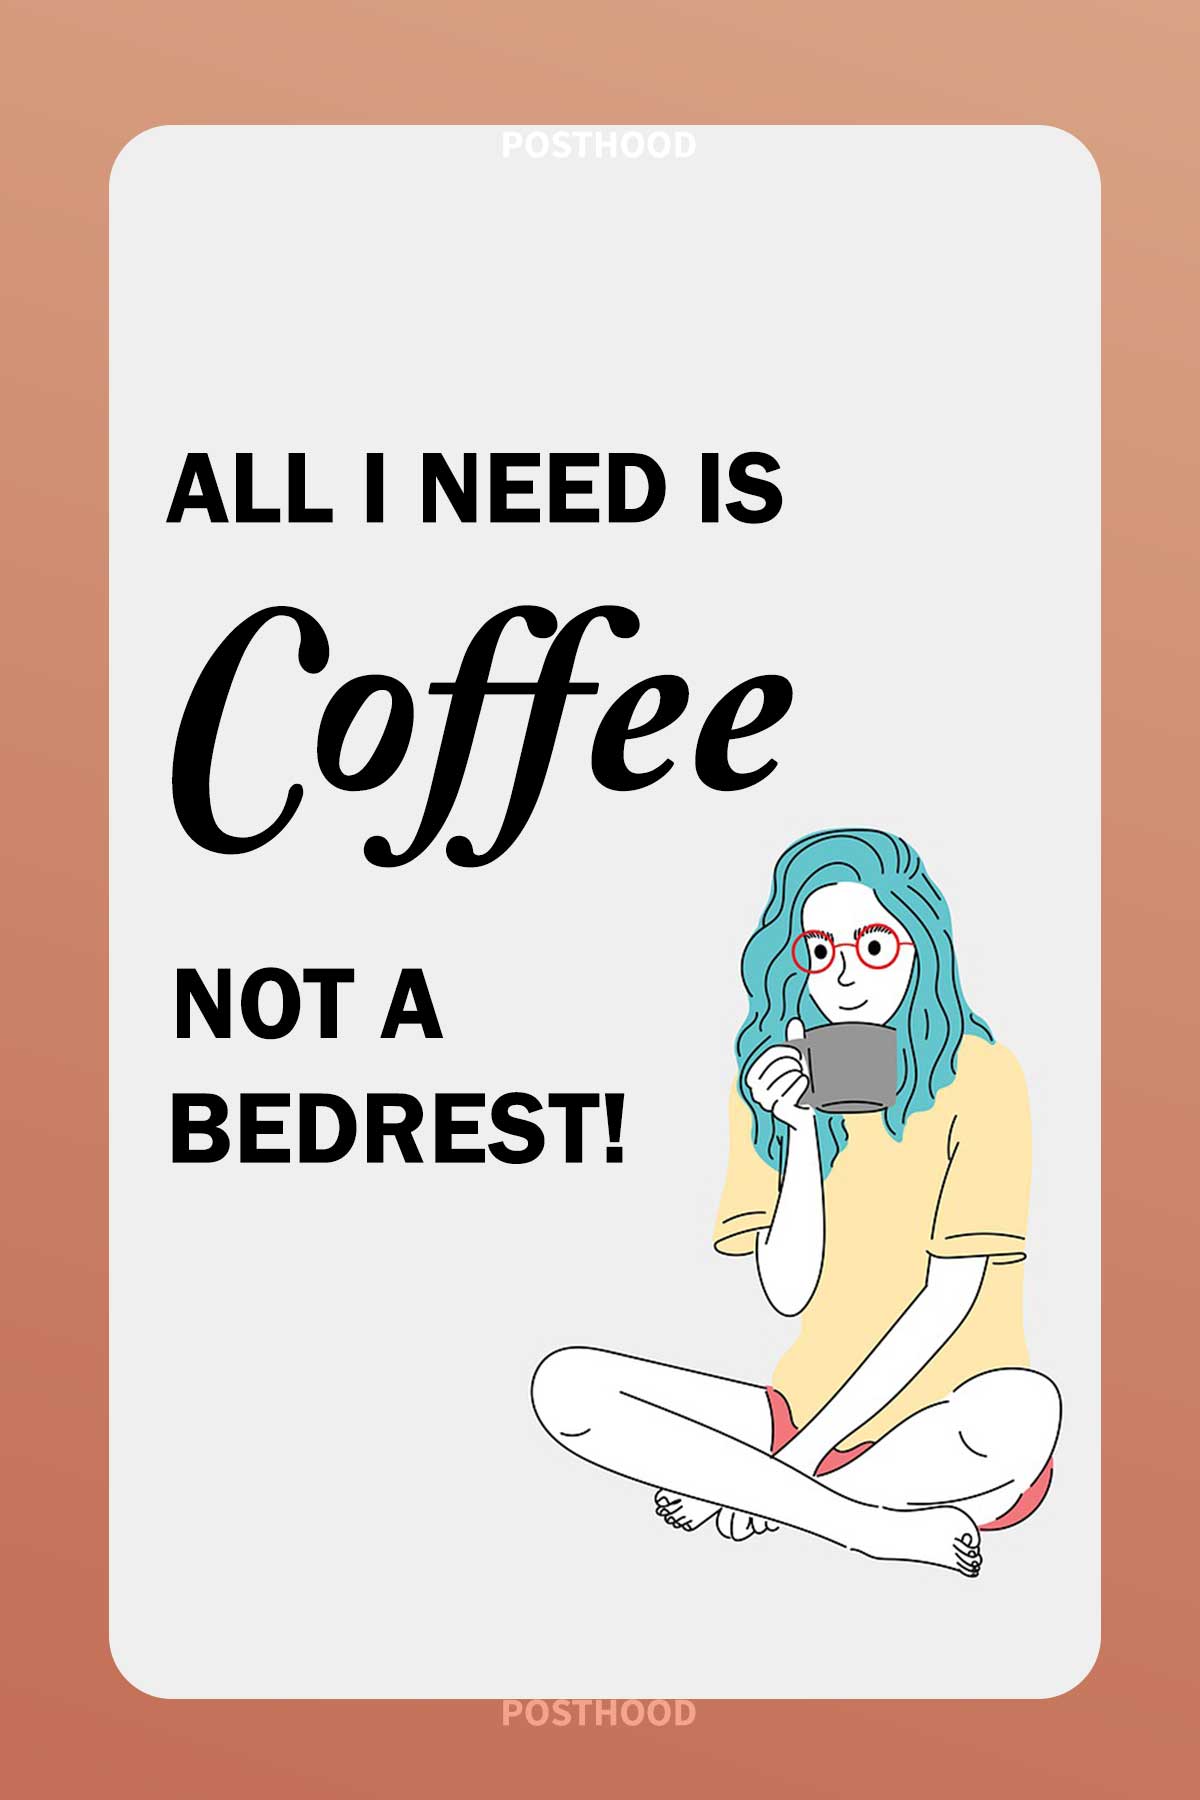 Have you ever documented your feelings before and after coffee? Get the right kind of boost with these best humor coffee quotes.